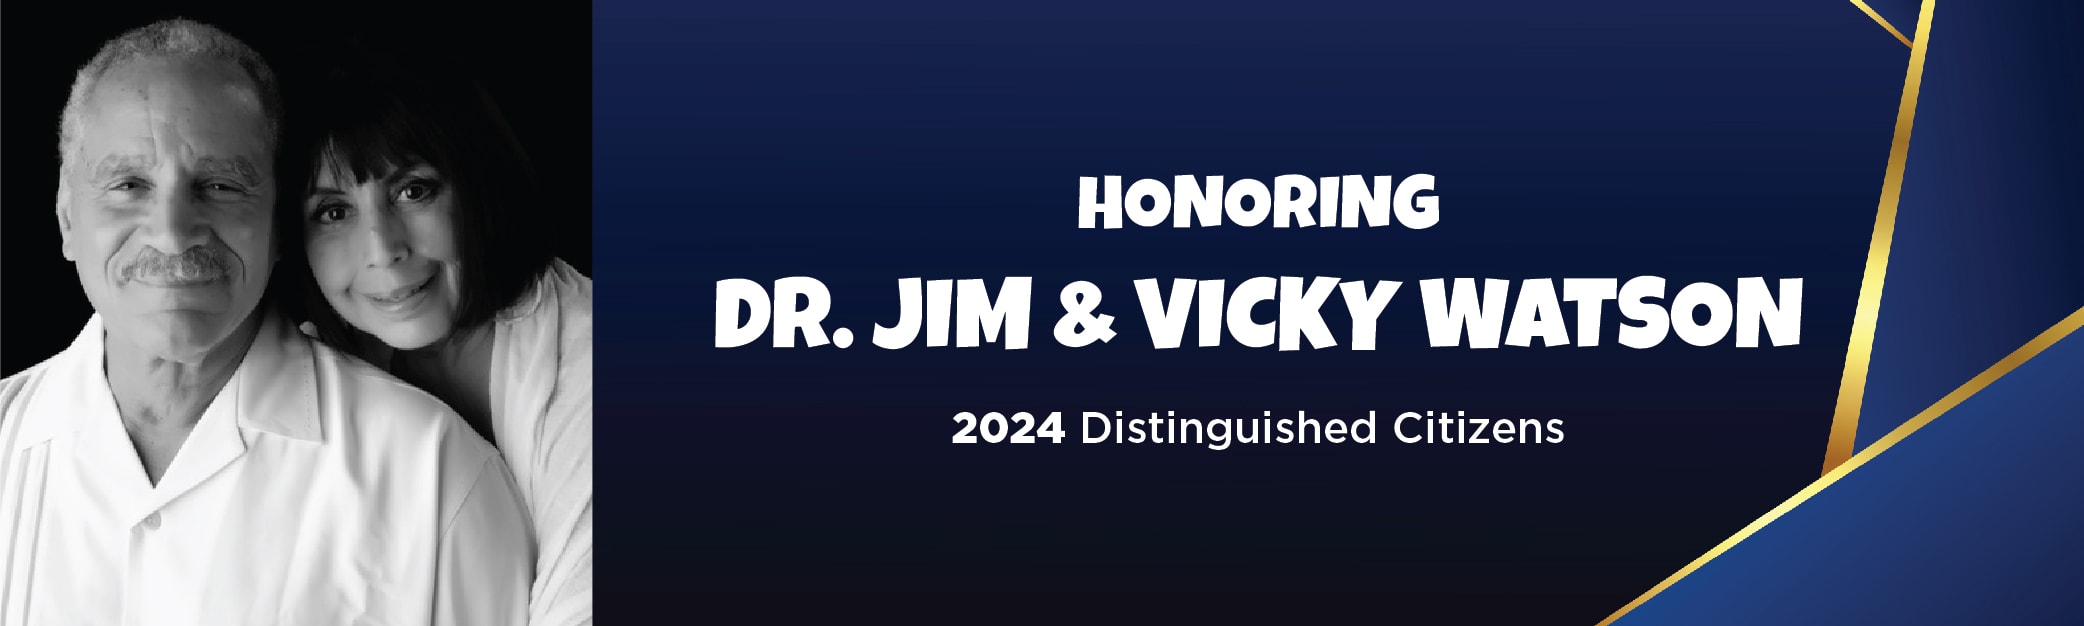 Honoring Dr. Jim and Vicky Watson